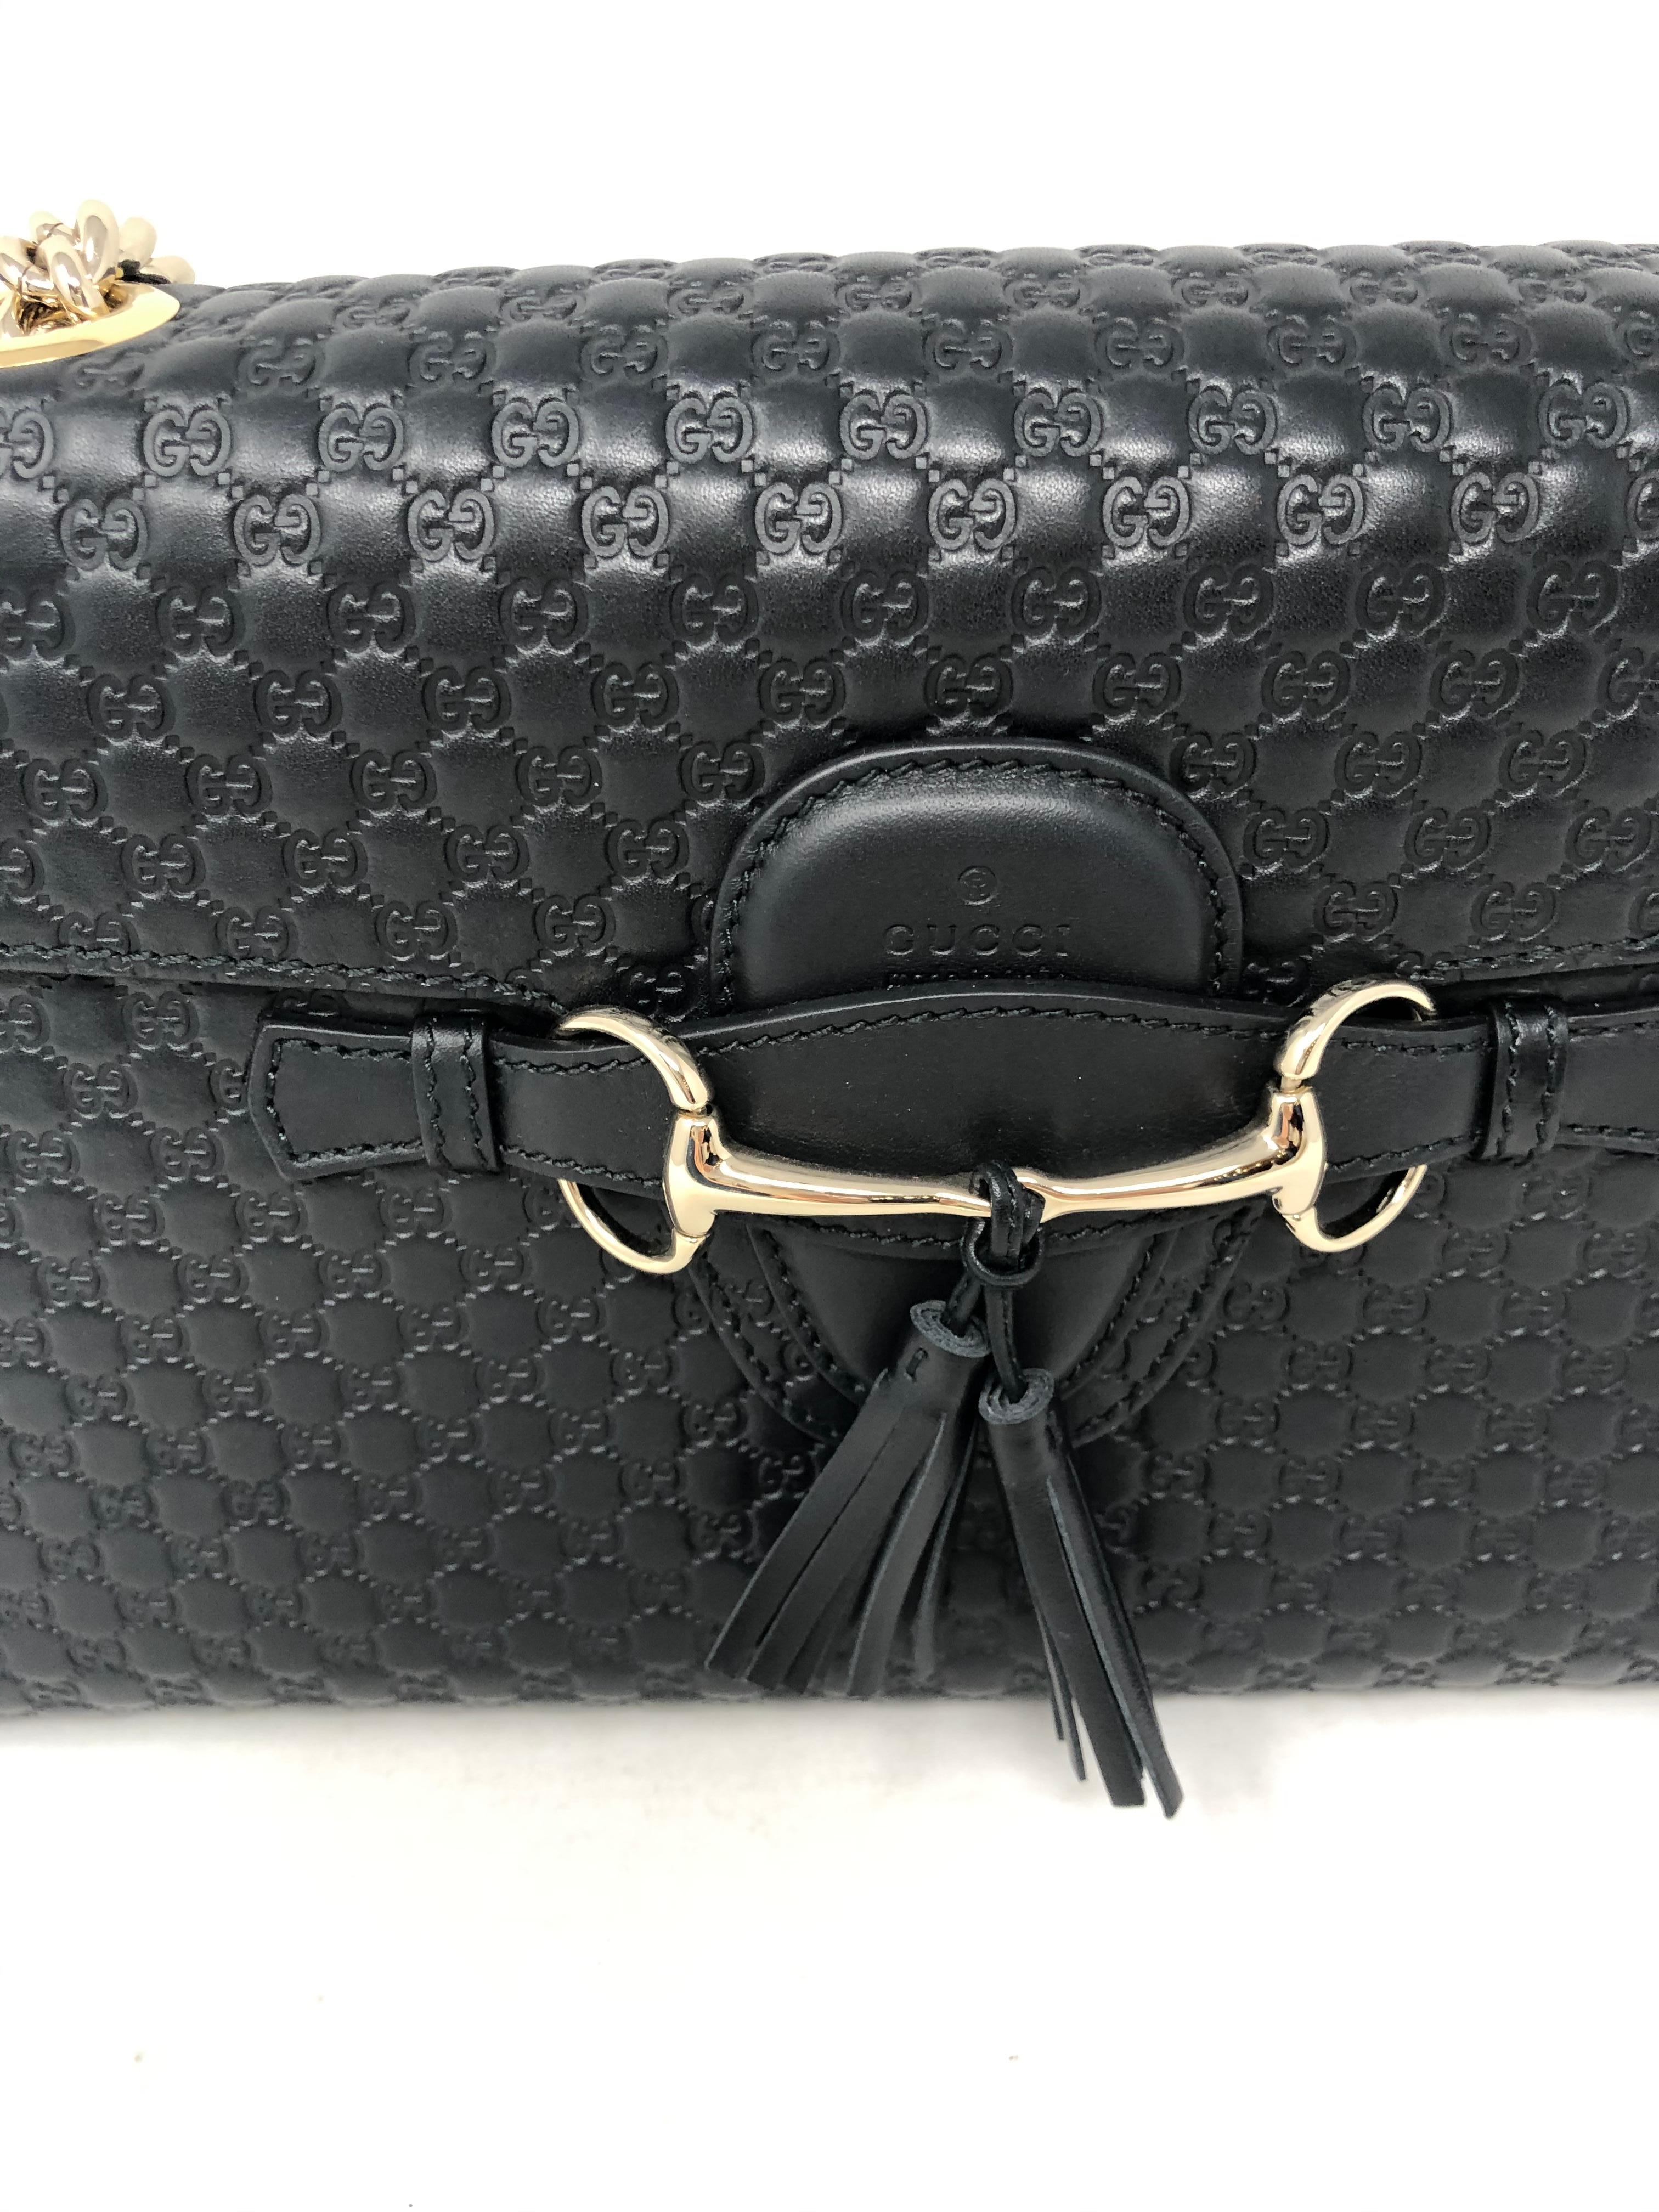 Gucci Embossed Black Leather Bag 3